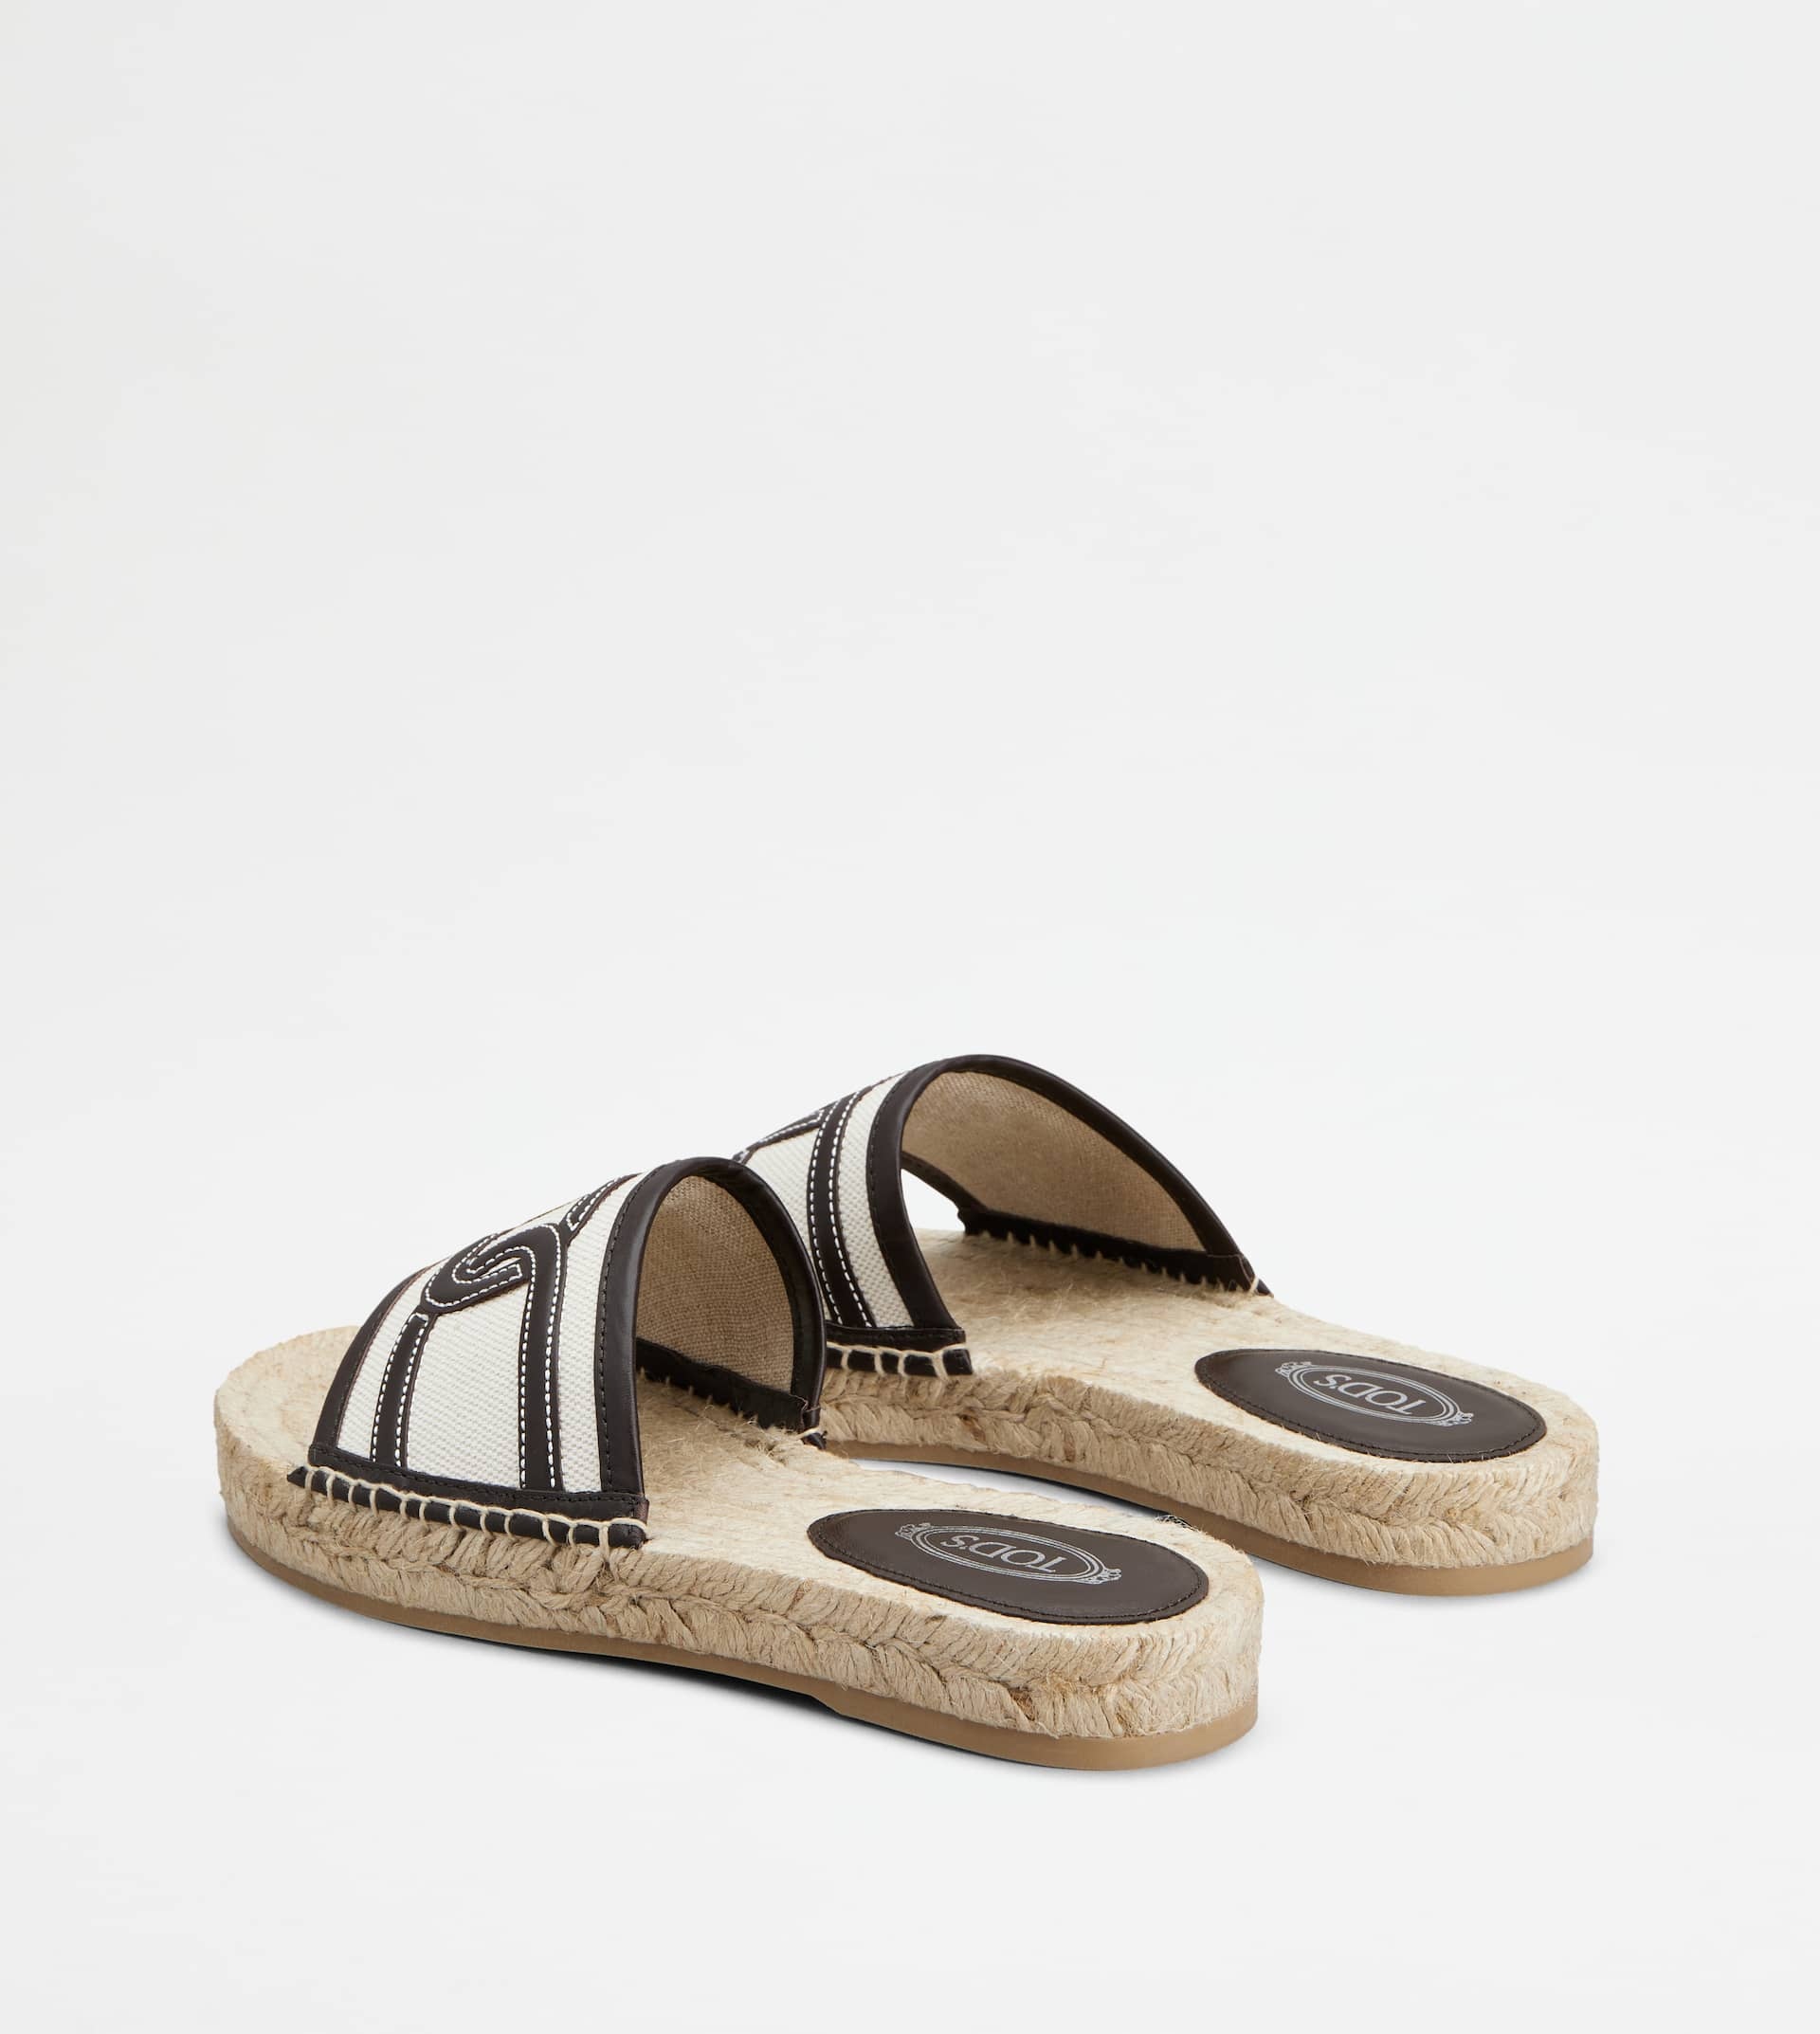 KATE SANDALS IN CANVAS AND LEATHER - WHITE, BLACK - 2